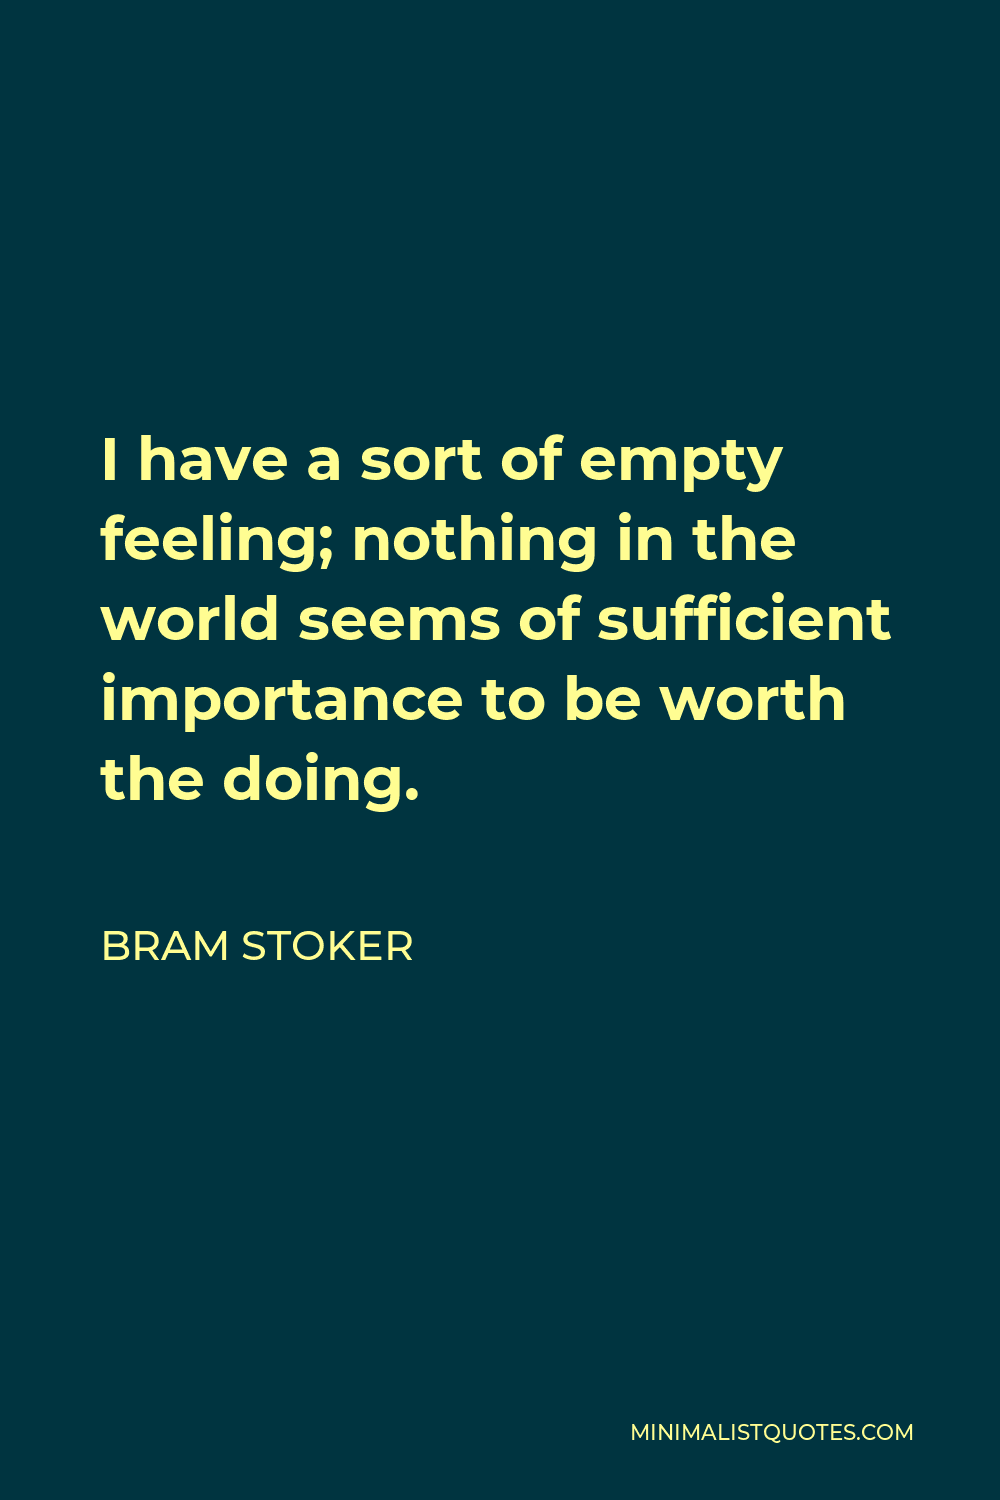 Bram Stoker Quote: I have a sort of empty feeling; nothing in the world ...